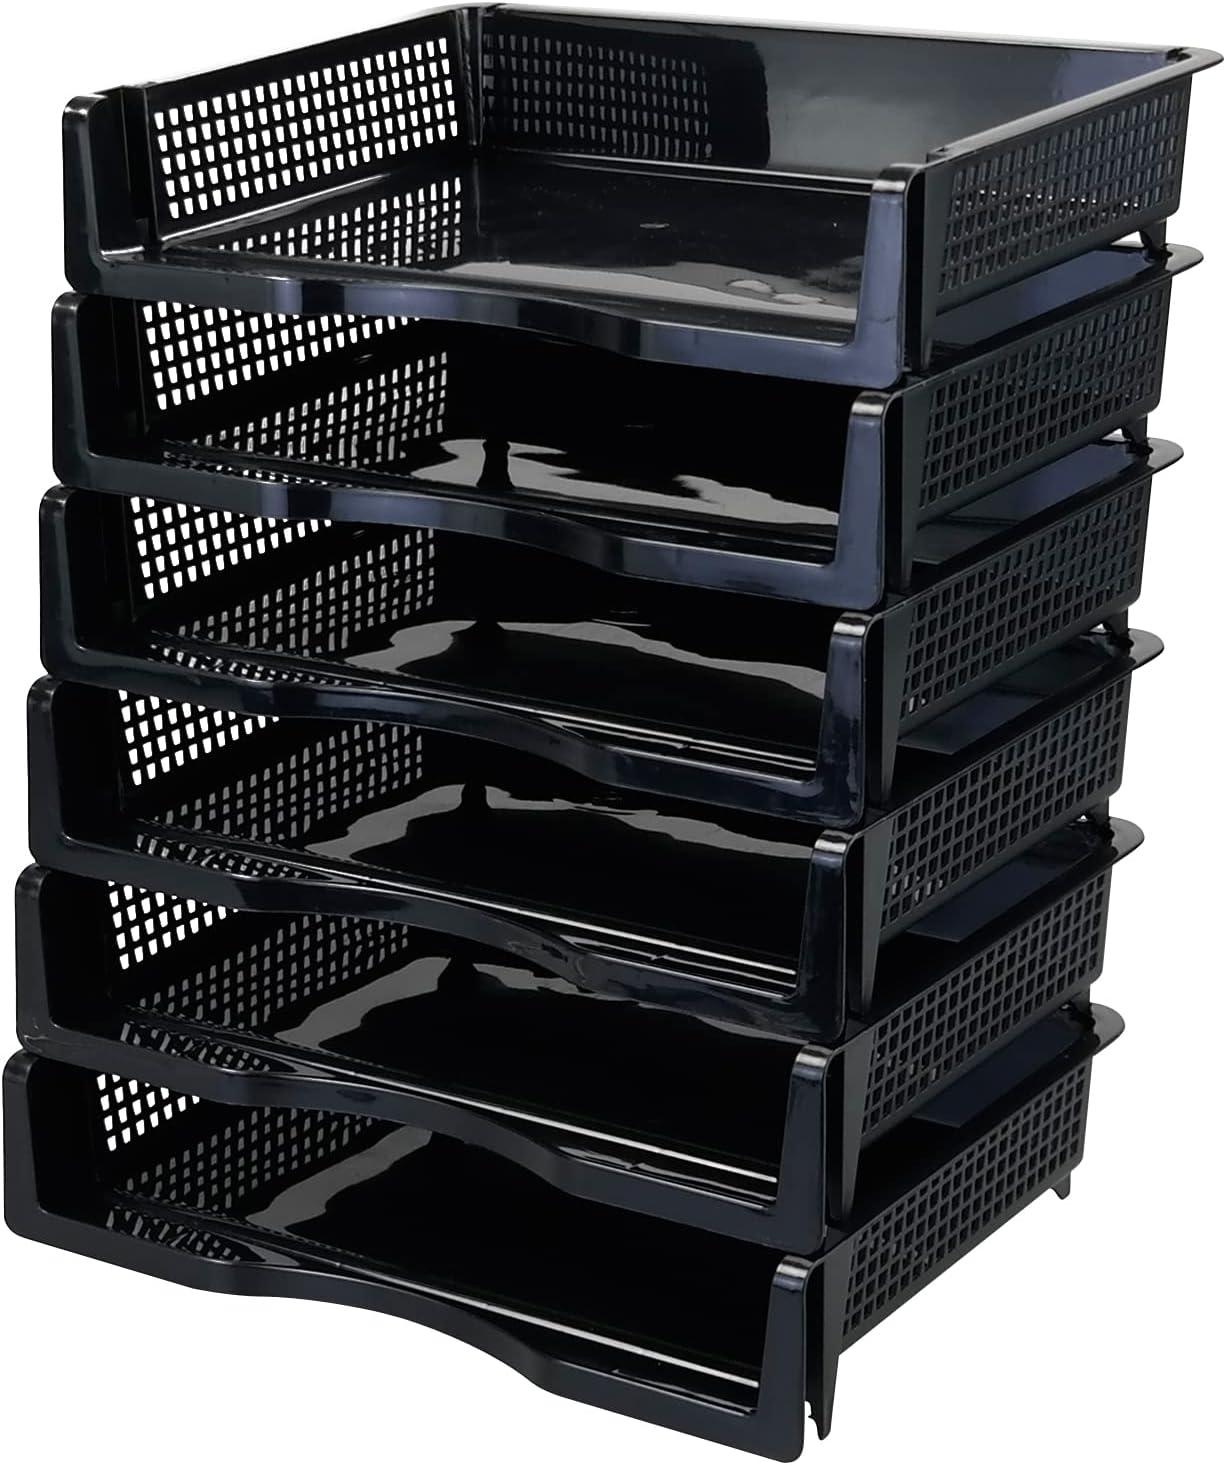 minekkyes stackable office tray 6 tier document letter tray organizer black stacking tray  minekkyes